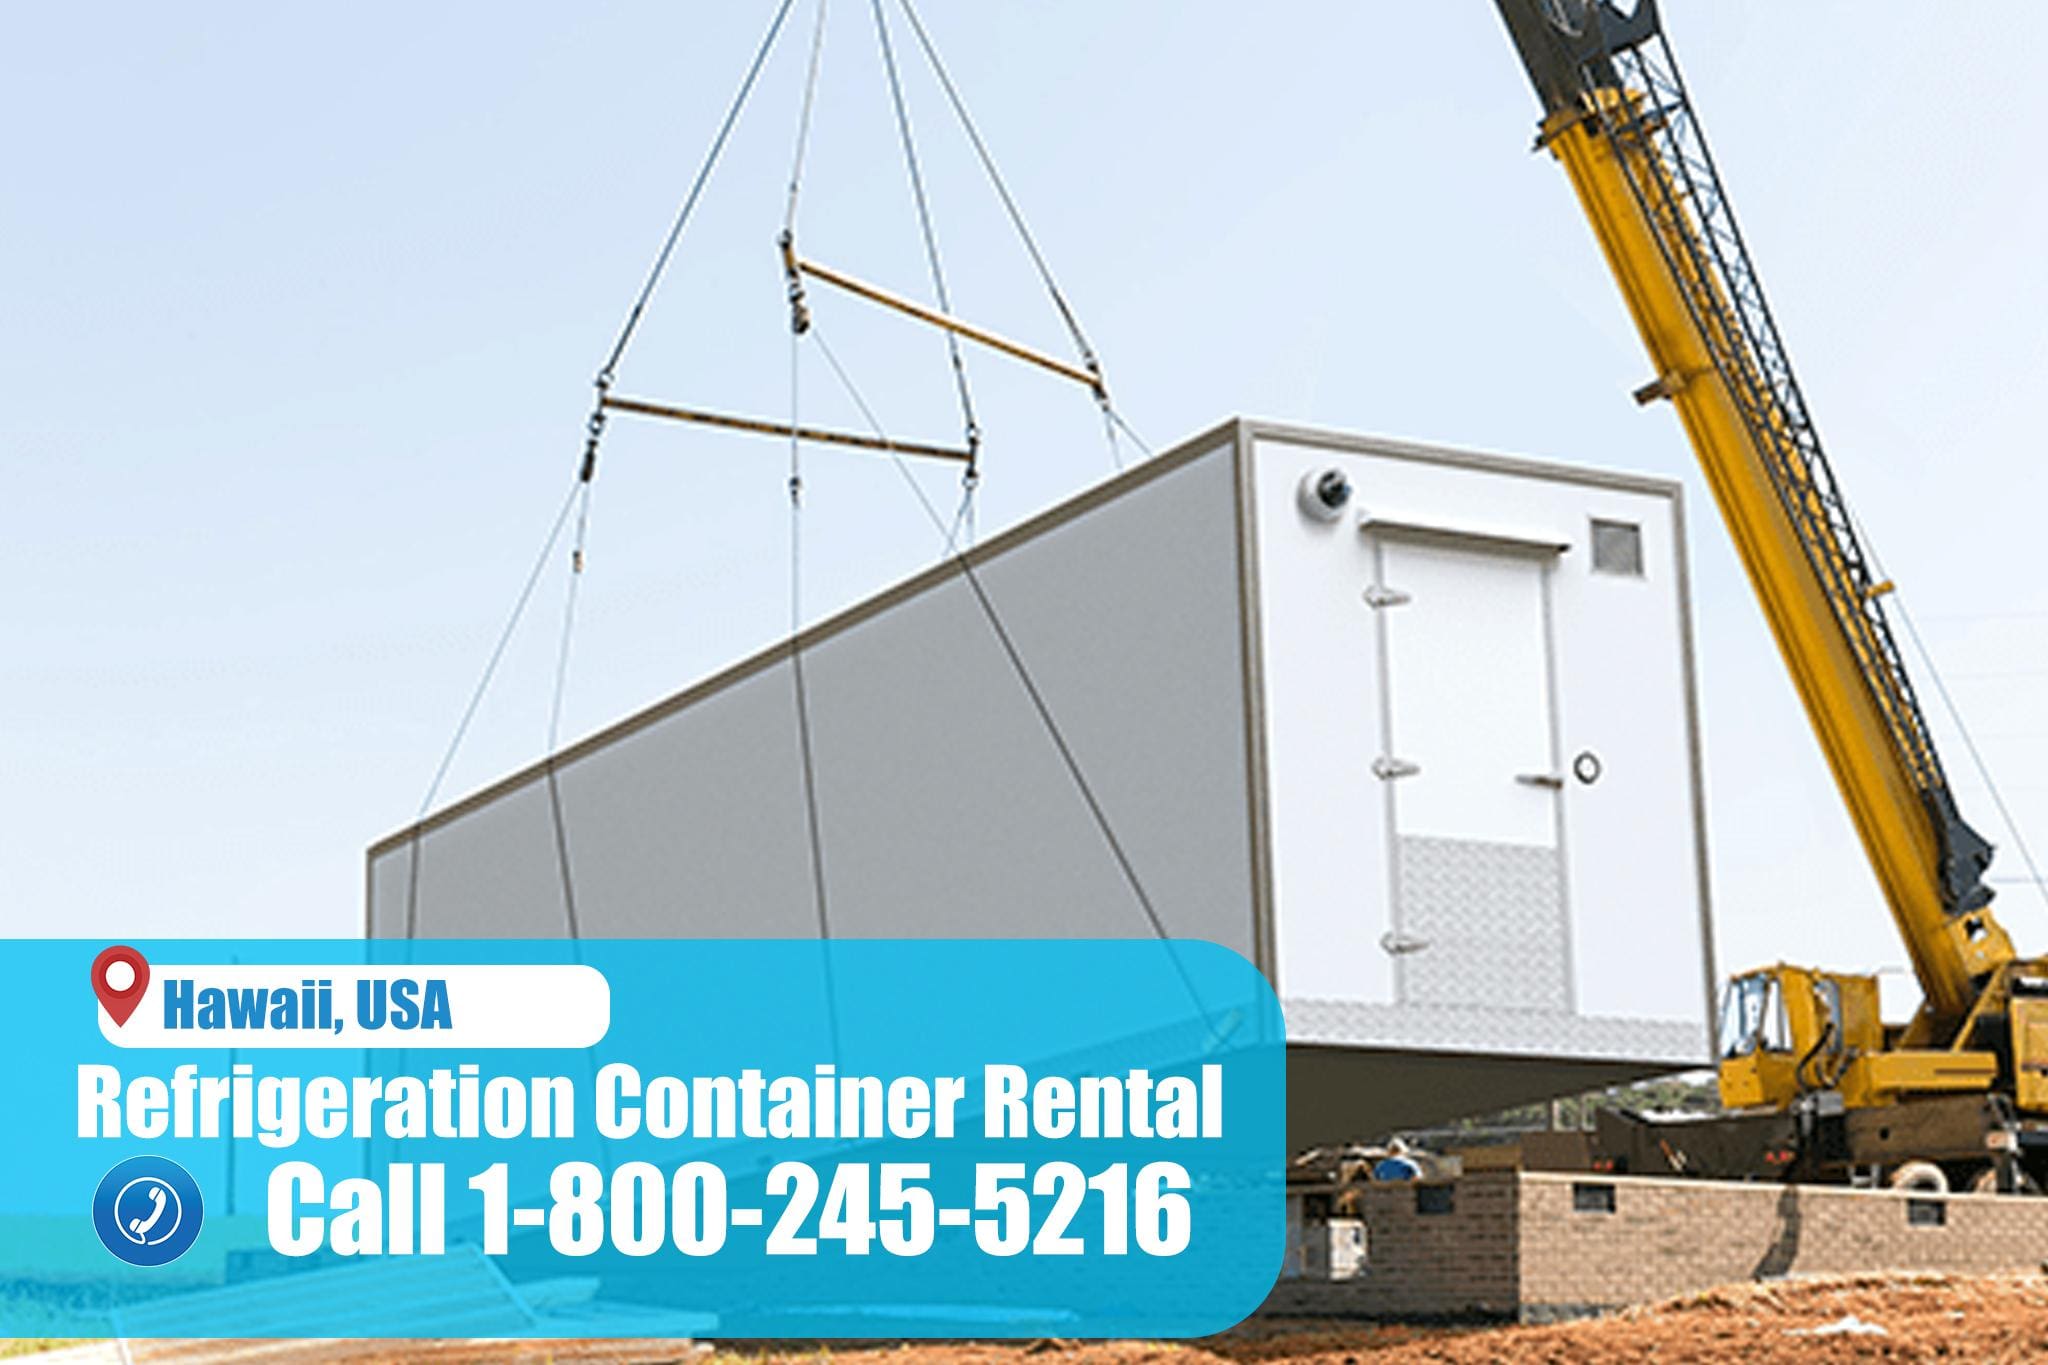 Refrigeration Container Rental in Hawaii